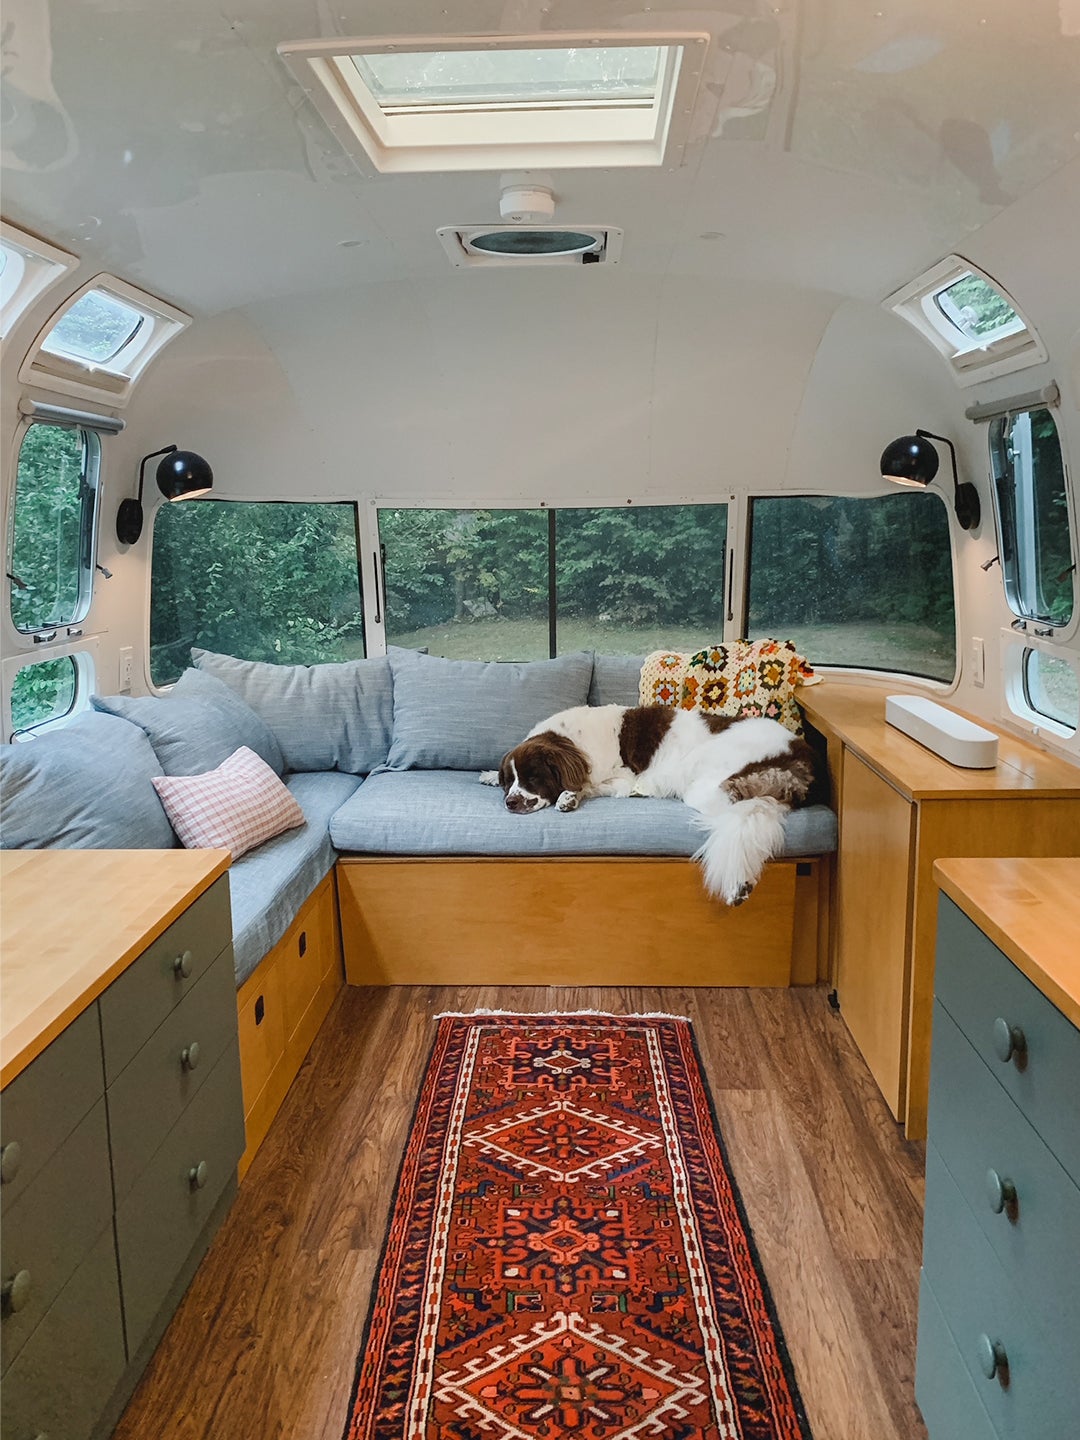 A Powder Blue Banquette and Green Cabinetry Prove That Motor Homes Can Still Be Stylish